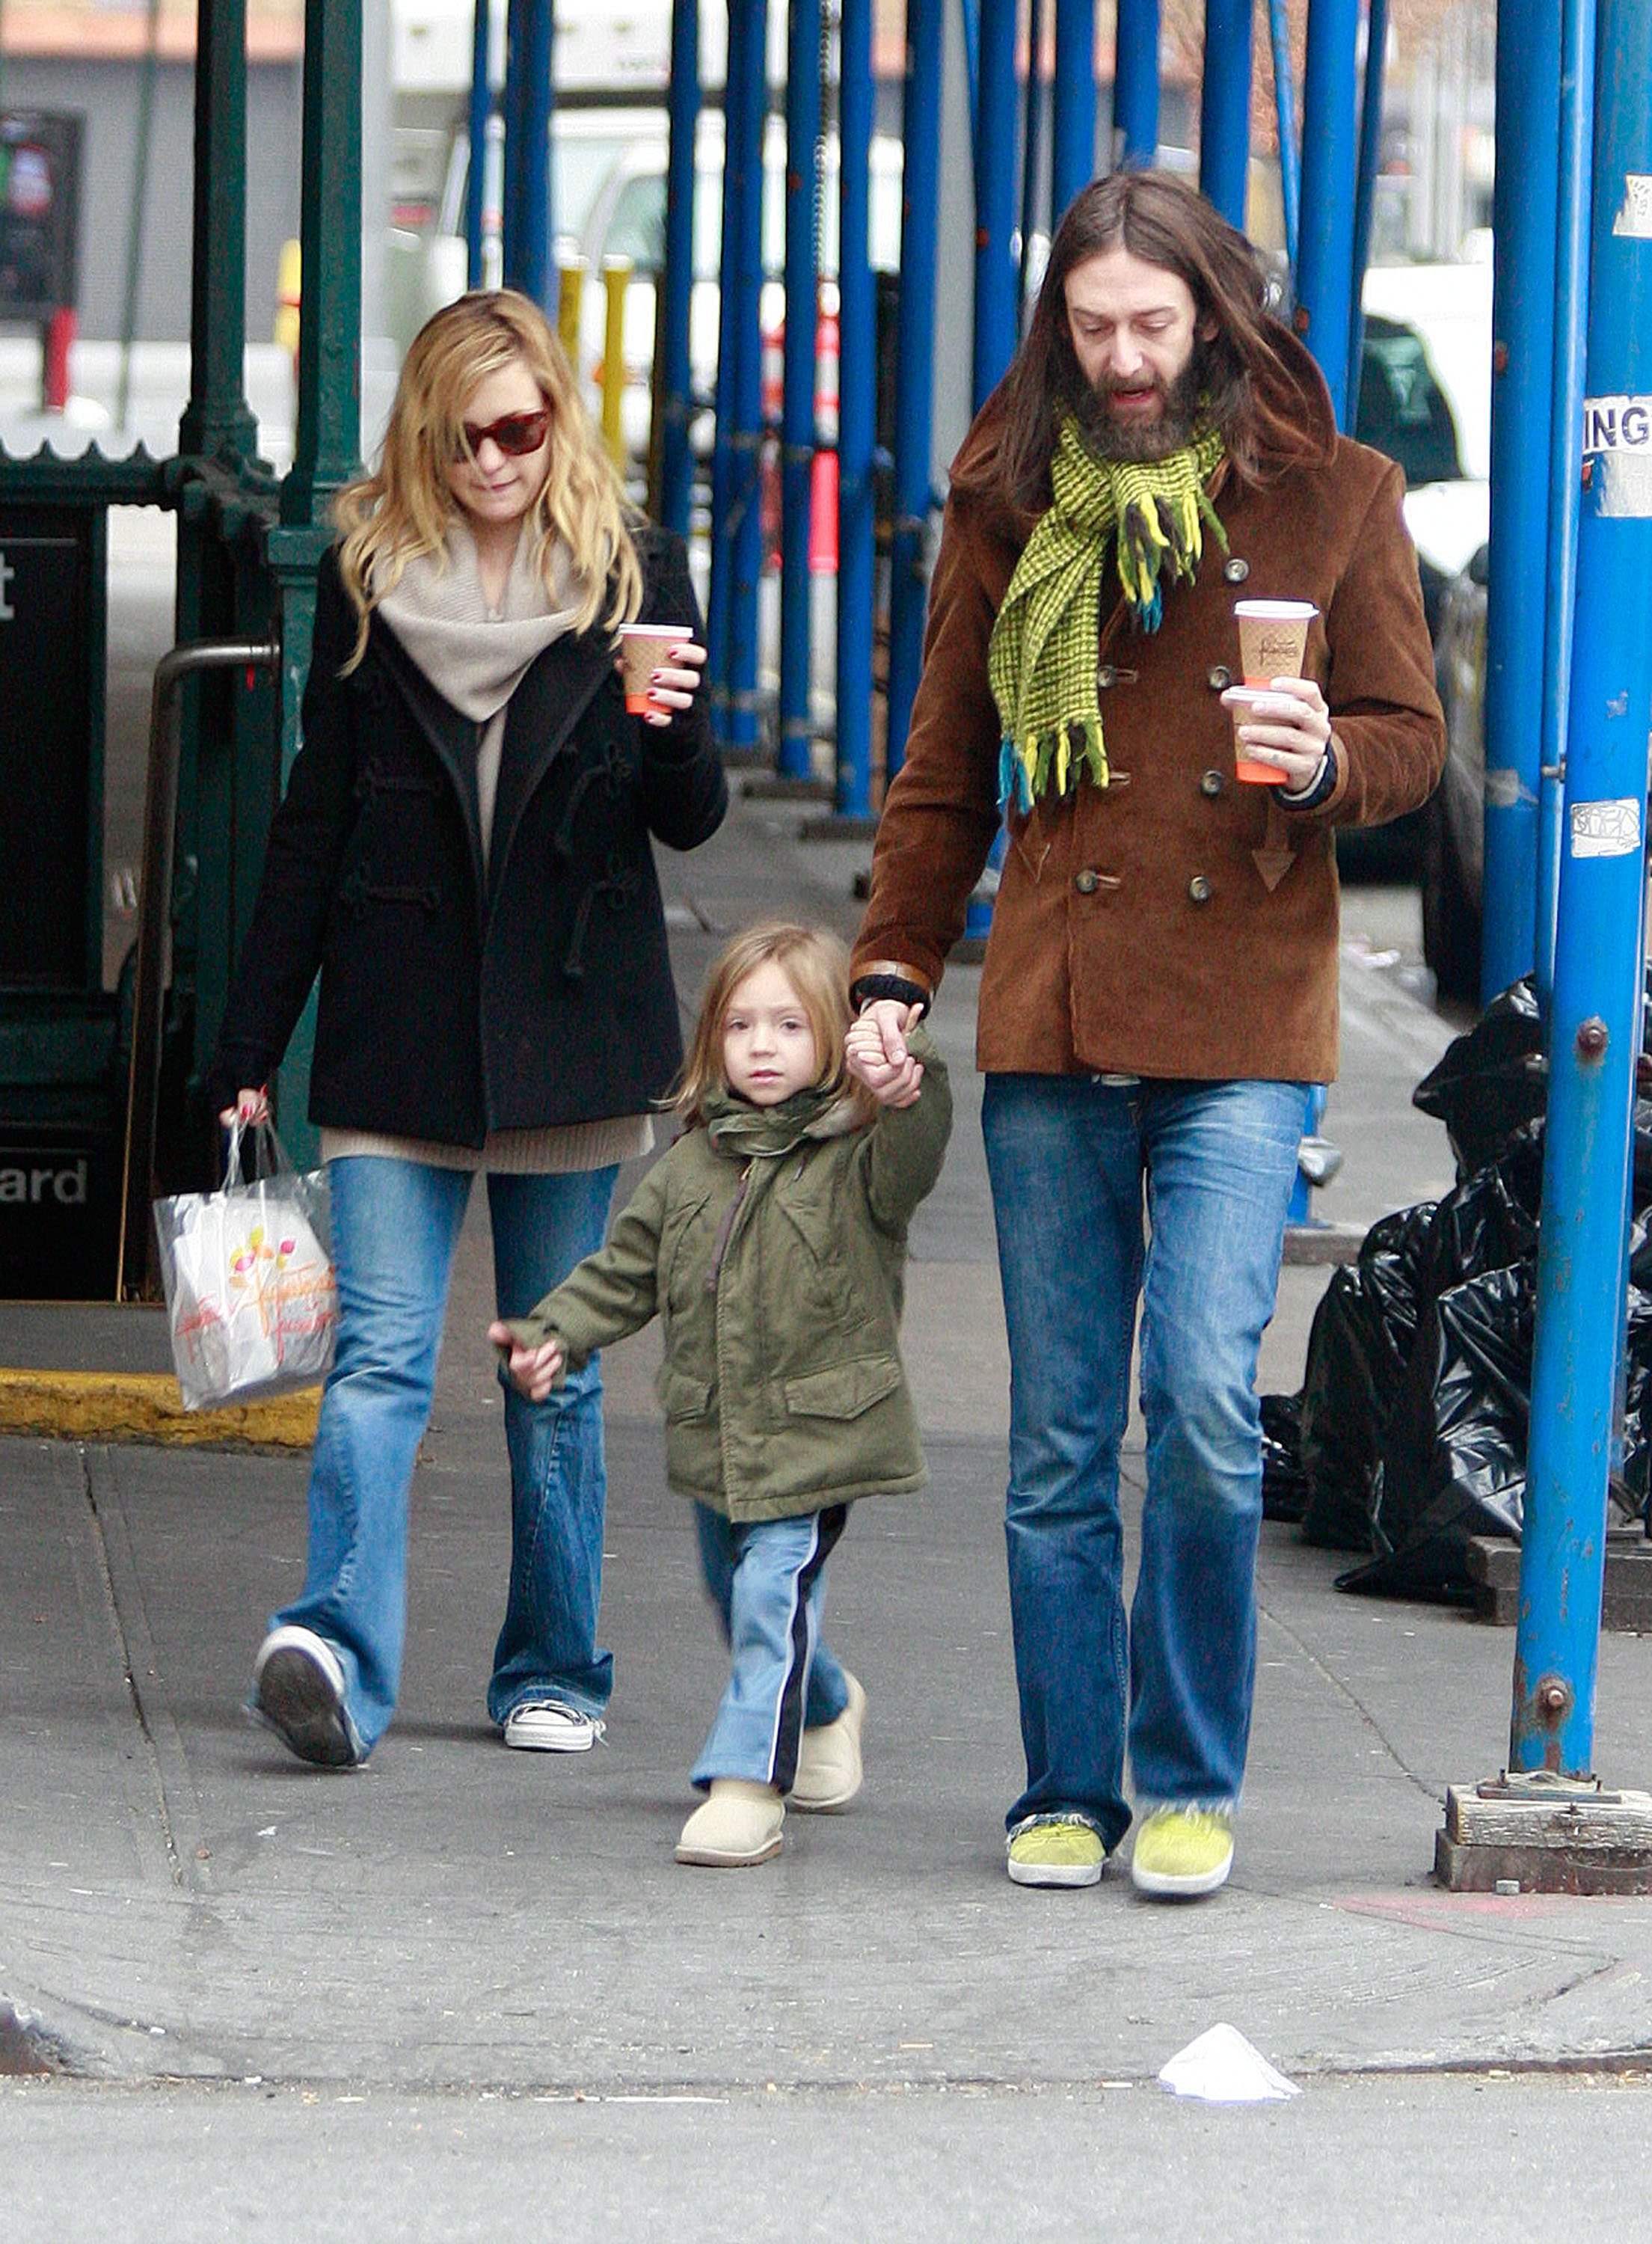 Kate Hudson and ex-husband Chris Robinson pictured walking with their son Ryder Robinson at SOHO on December 9, 2007 in New York, New York.  / Source: Getty Images